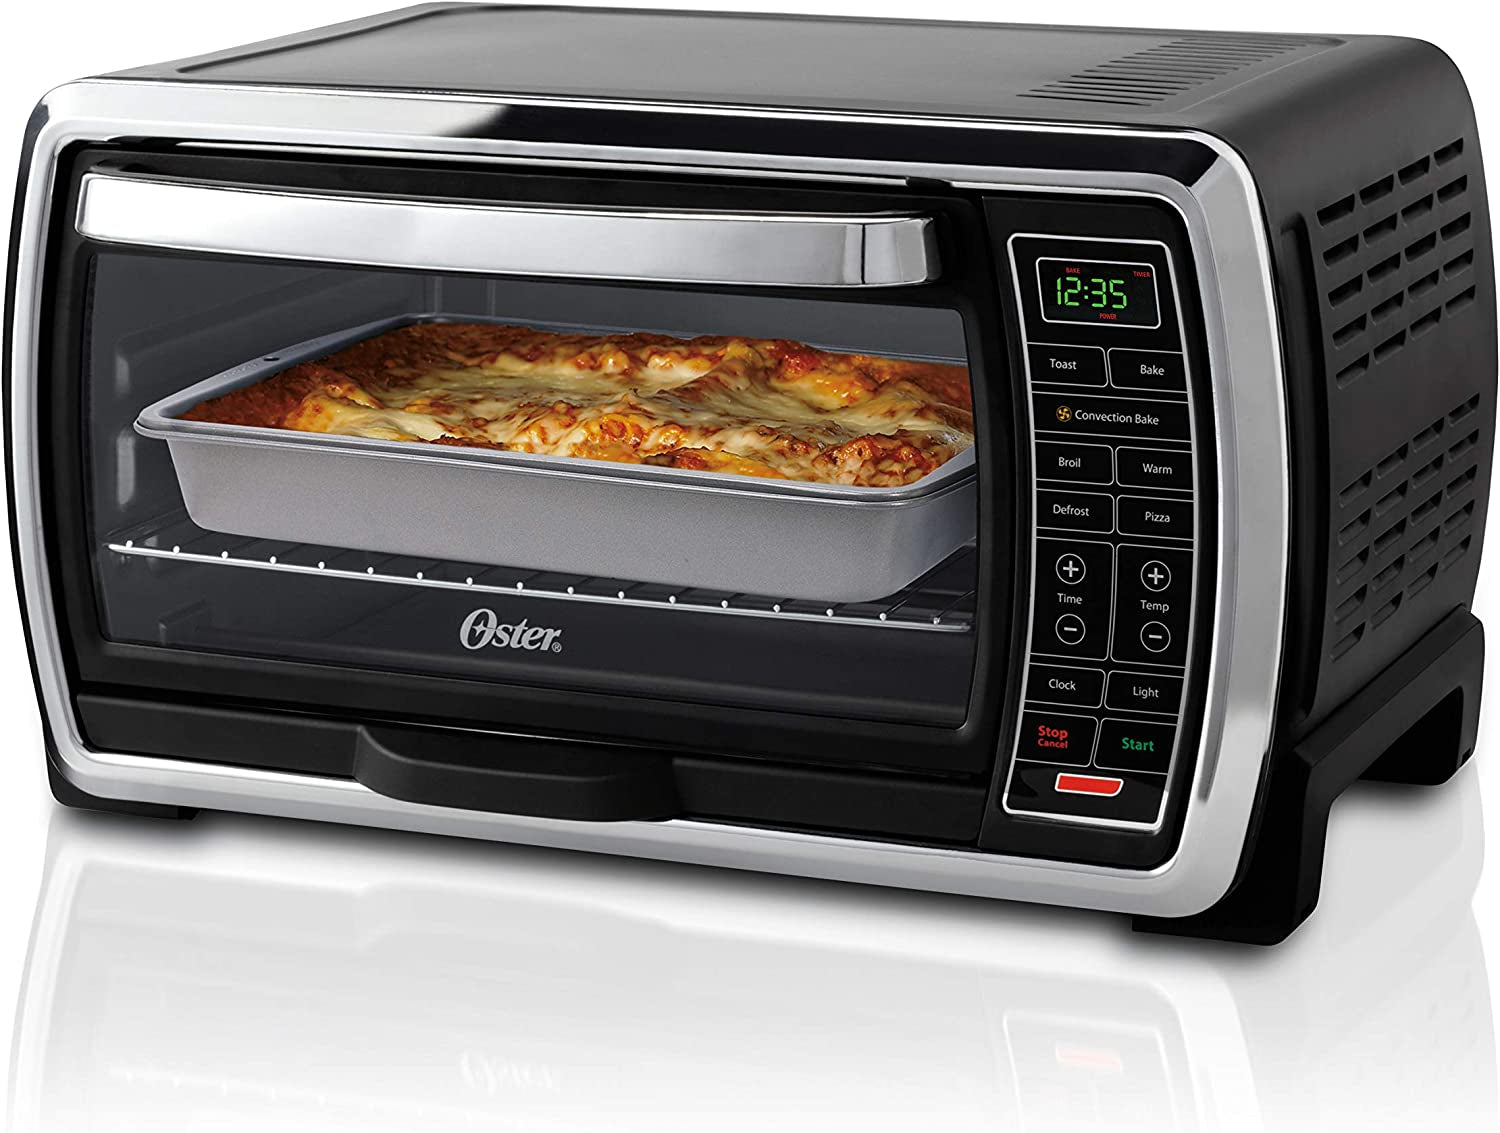 Digital Convection Toaster Oven | Spacious 6-Slice Capacity, Black/Polished Stainless Steel